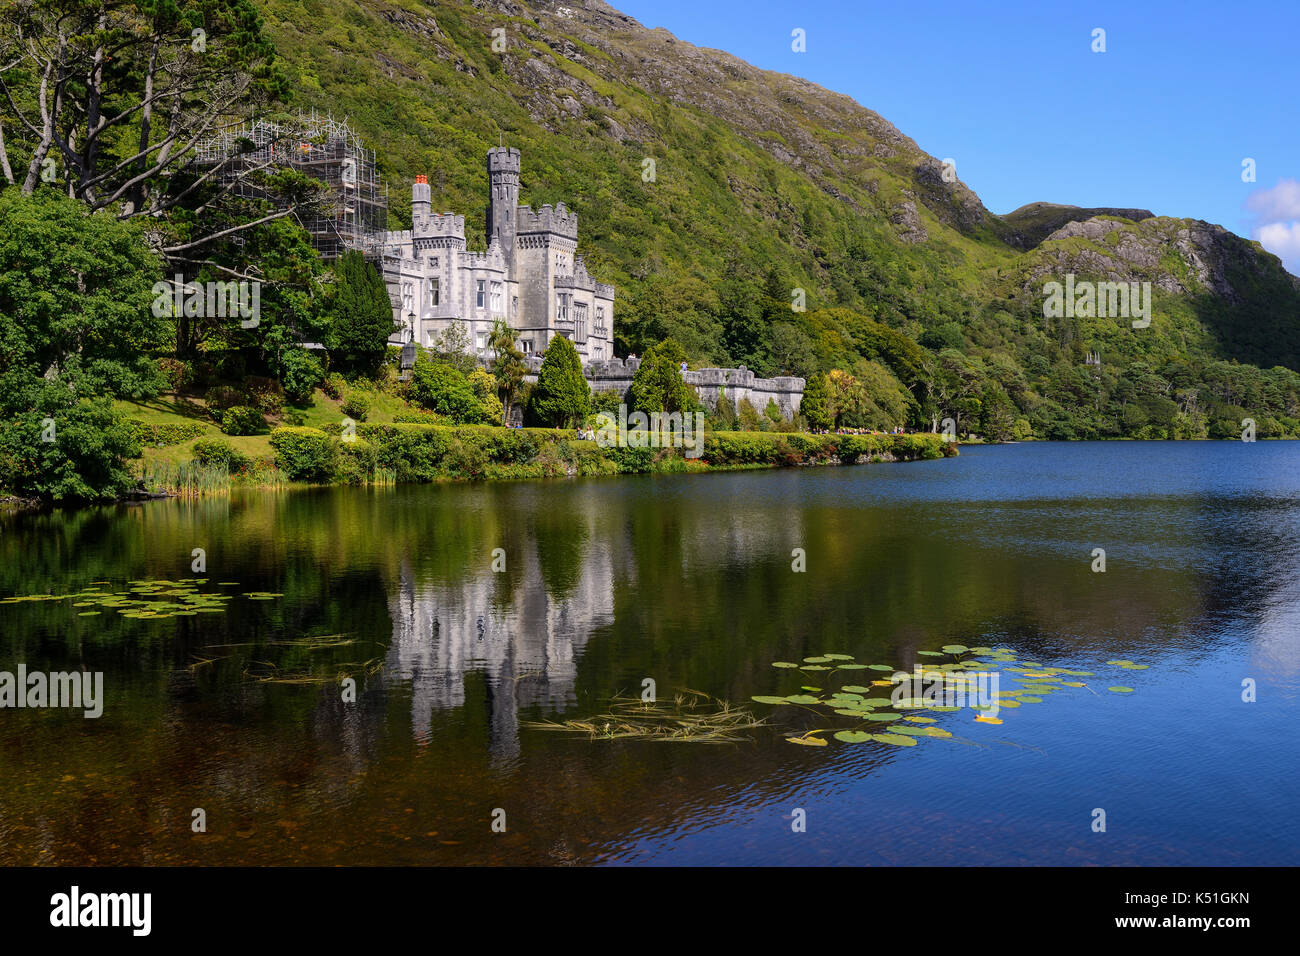 Kylemore Abbey on the banks of Pollacappul Lough in Connemara, County Galway, Republic of Ireland Stock Photo